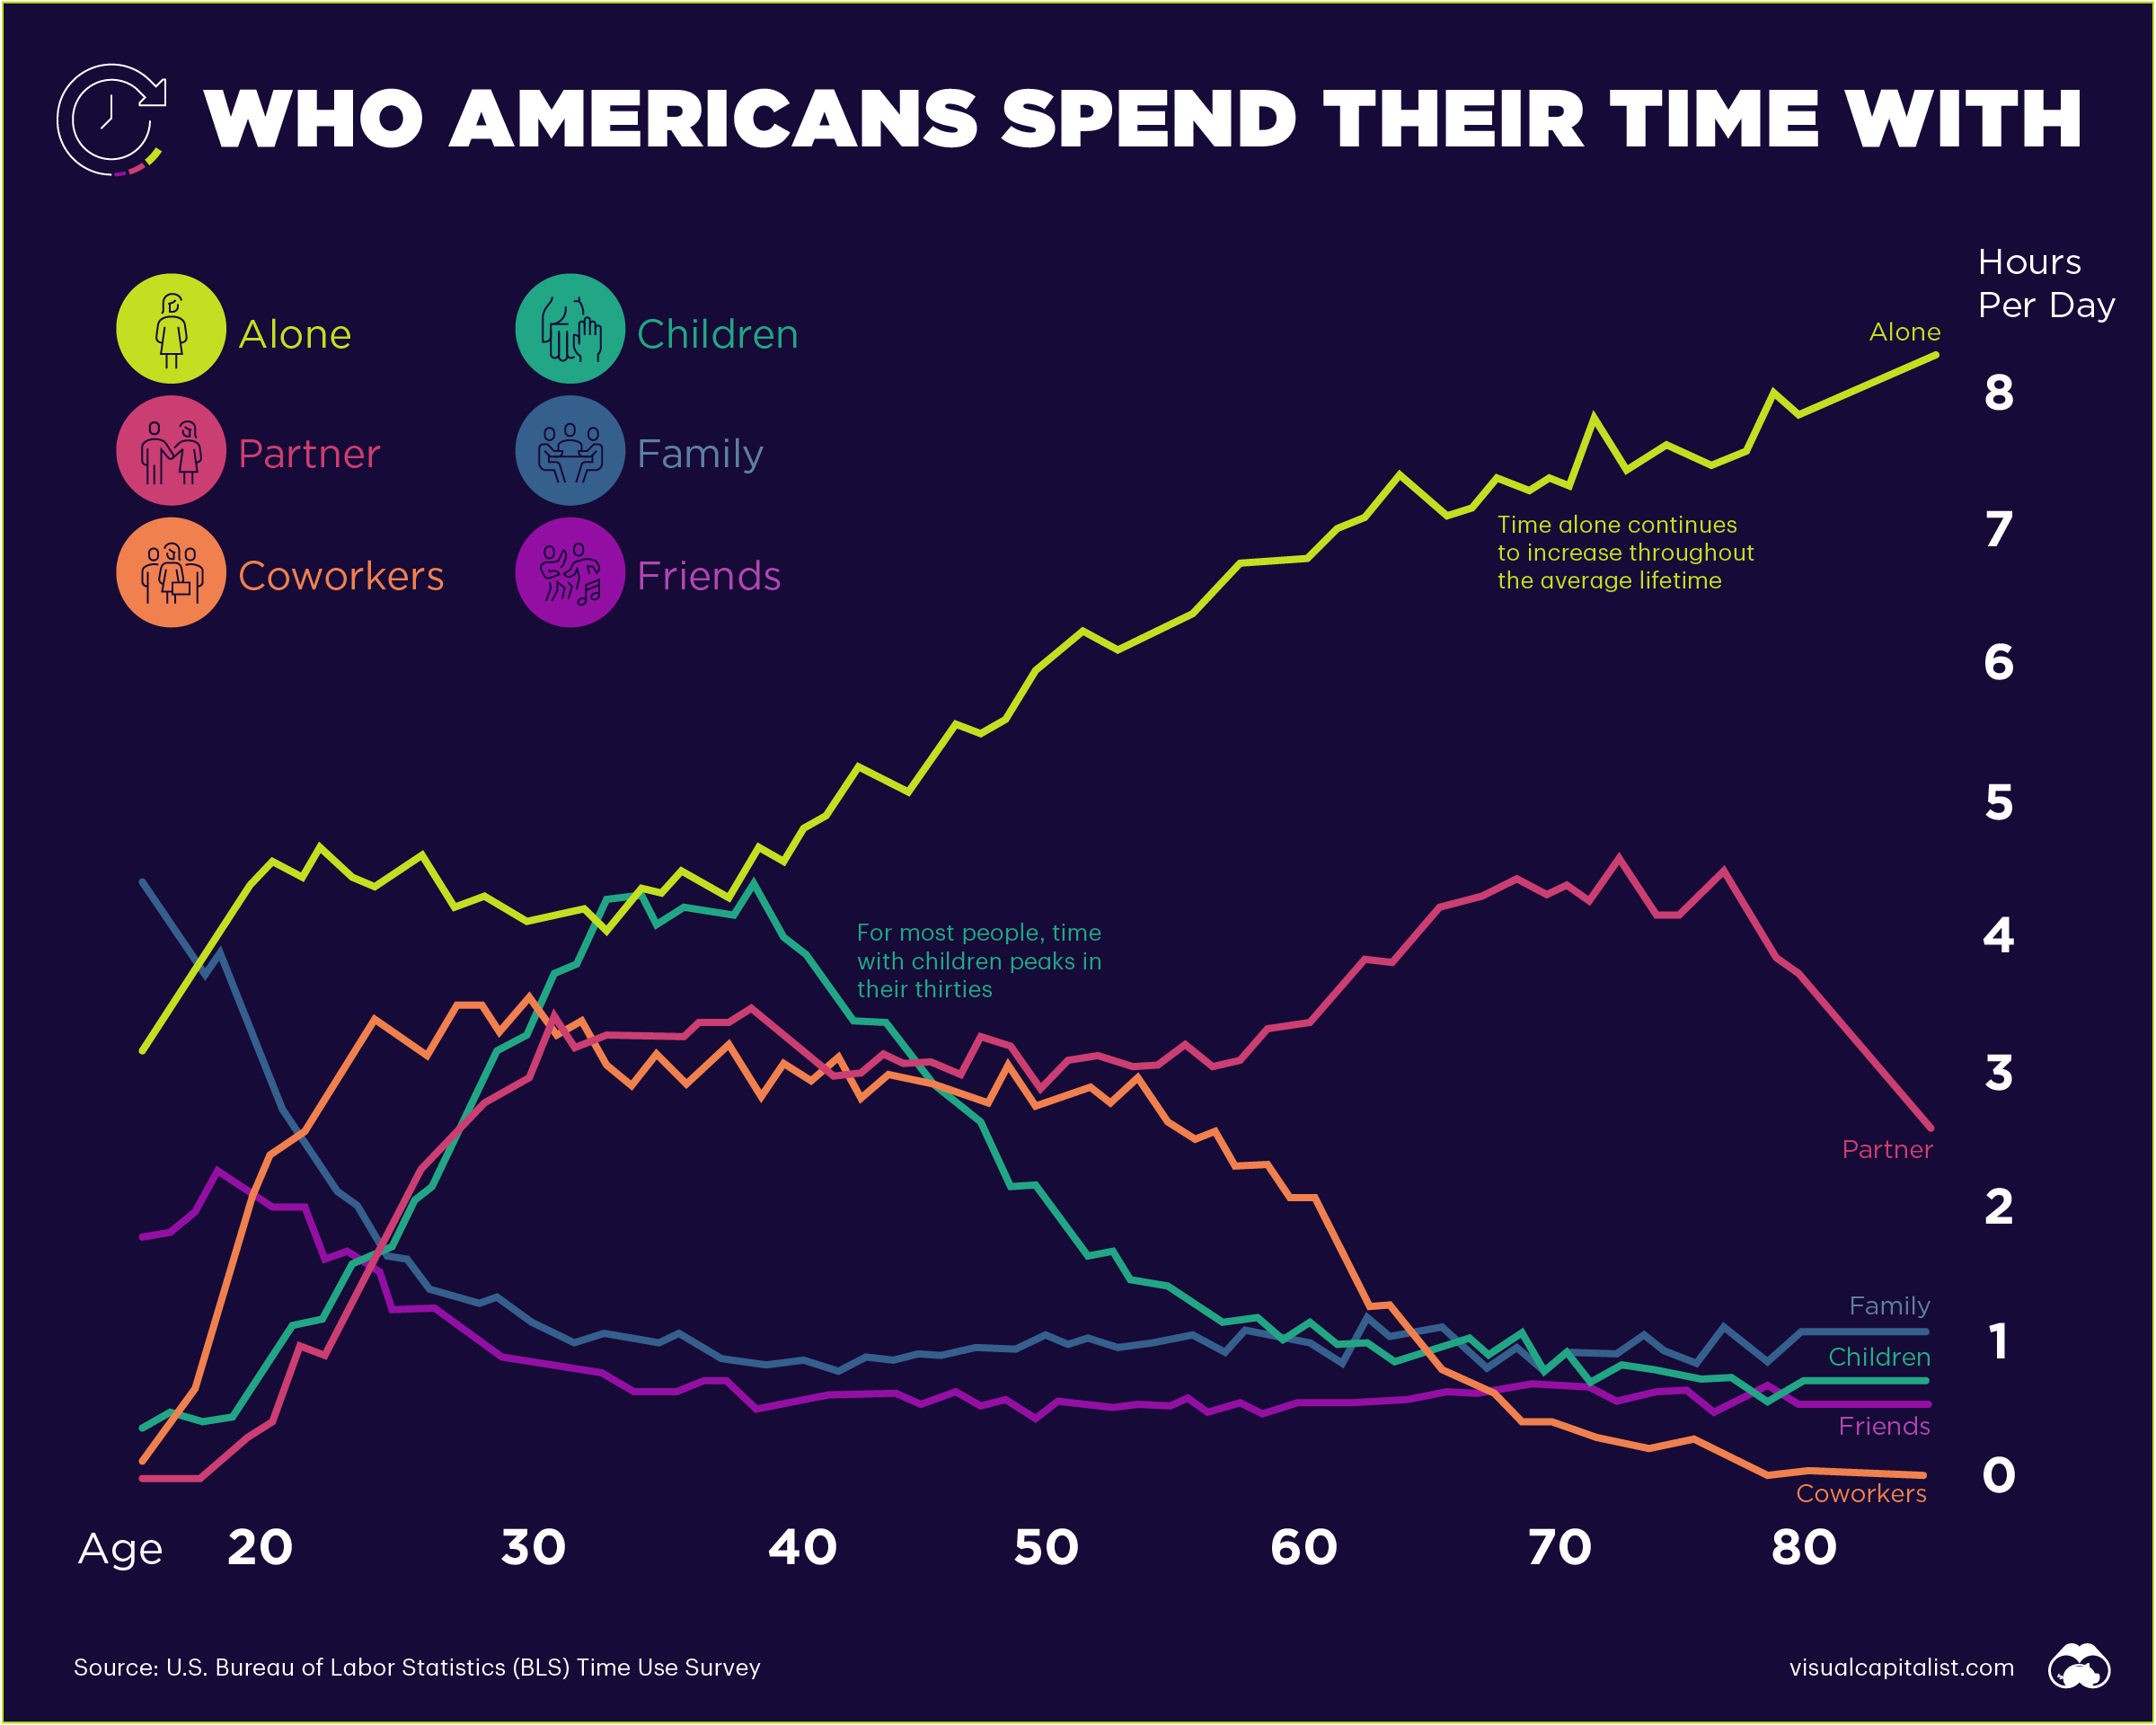 Chart showing who Americans spend their time with over their lifetime